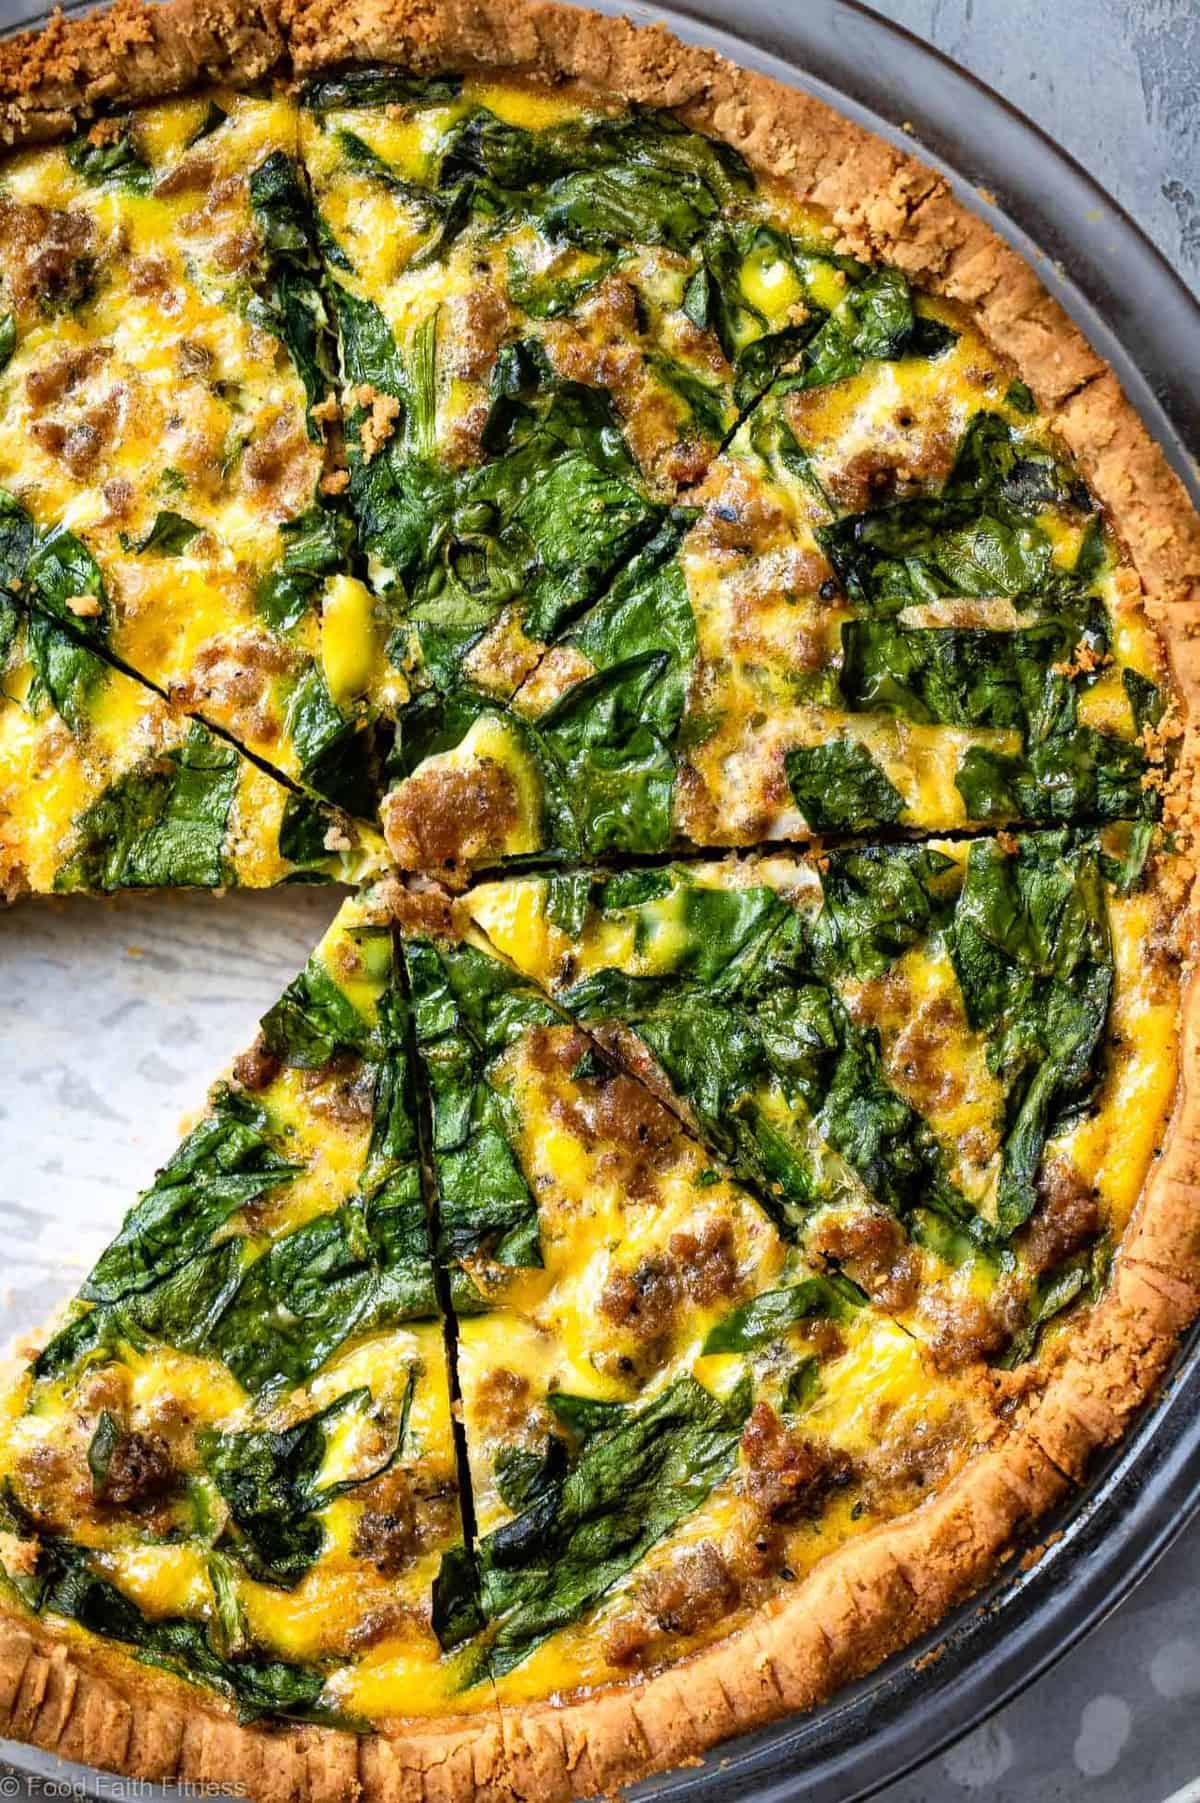 Gluten Free Low Carb Quiche -Â This EASY low carb, dairy free and paleoÂ Quiche has a homemade, buttery, flaky Almond Flour Crust! Sausage, spinach and eggs make a high protein, filling breakfast!Â  Great for meal prep! | #Foodfaithfitness | #Glutenfree #Lowcarb #Keto #paleo #dairyfree